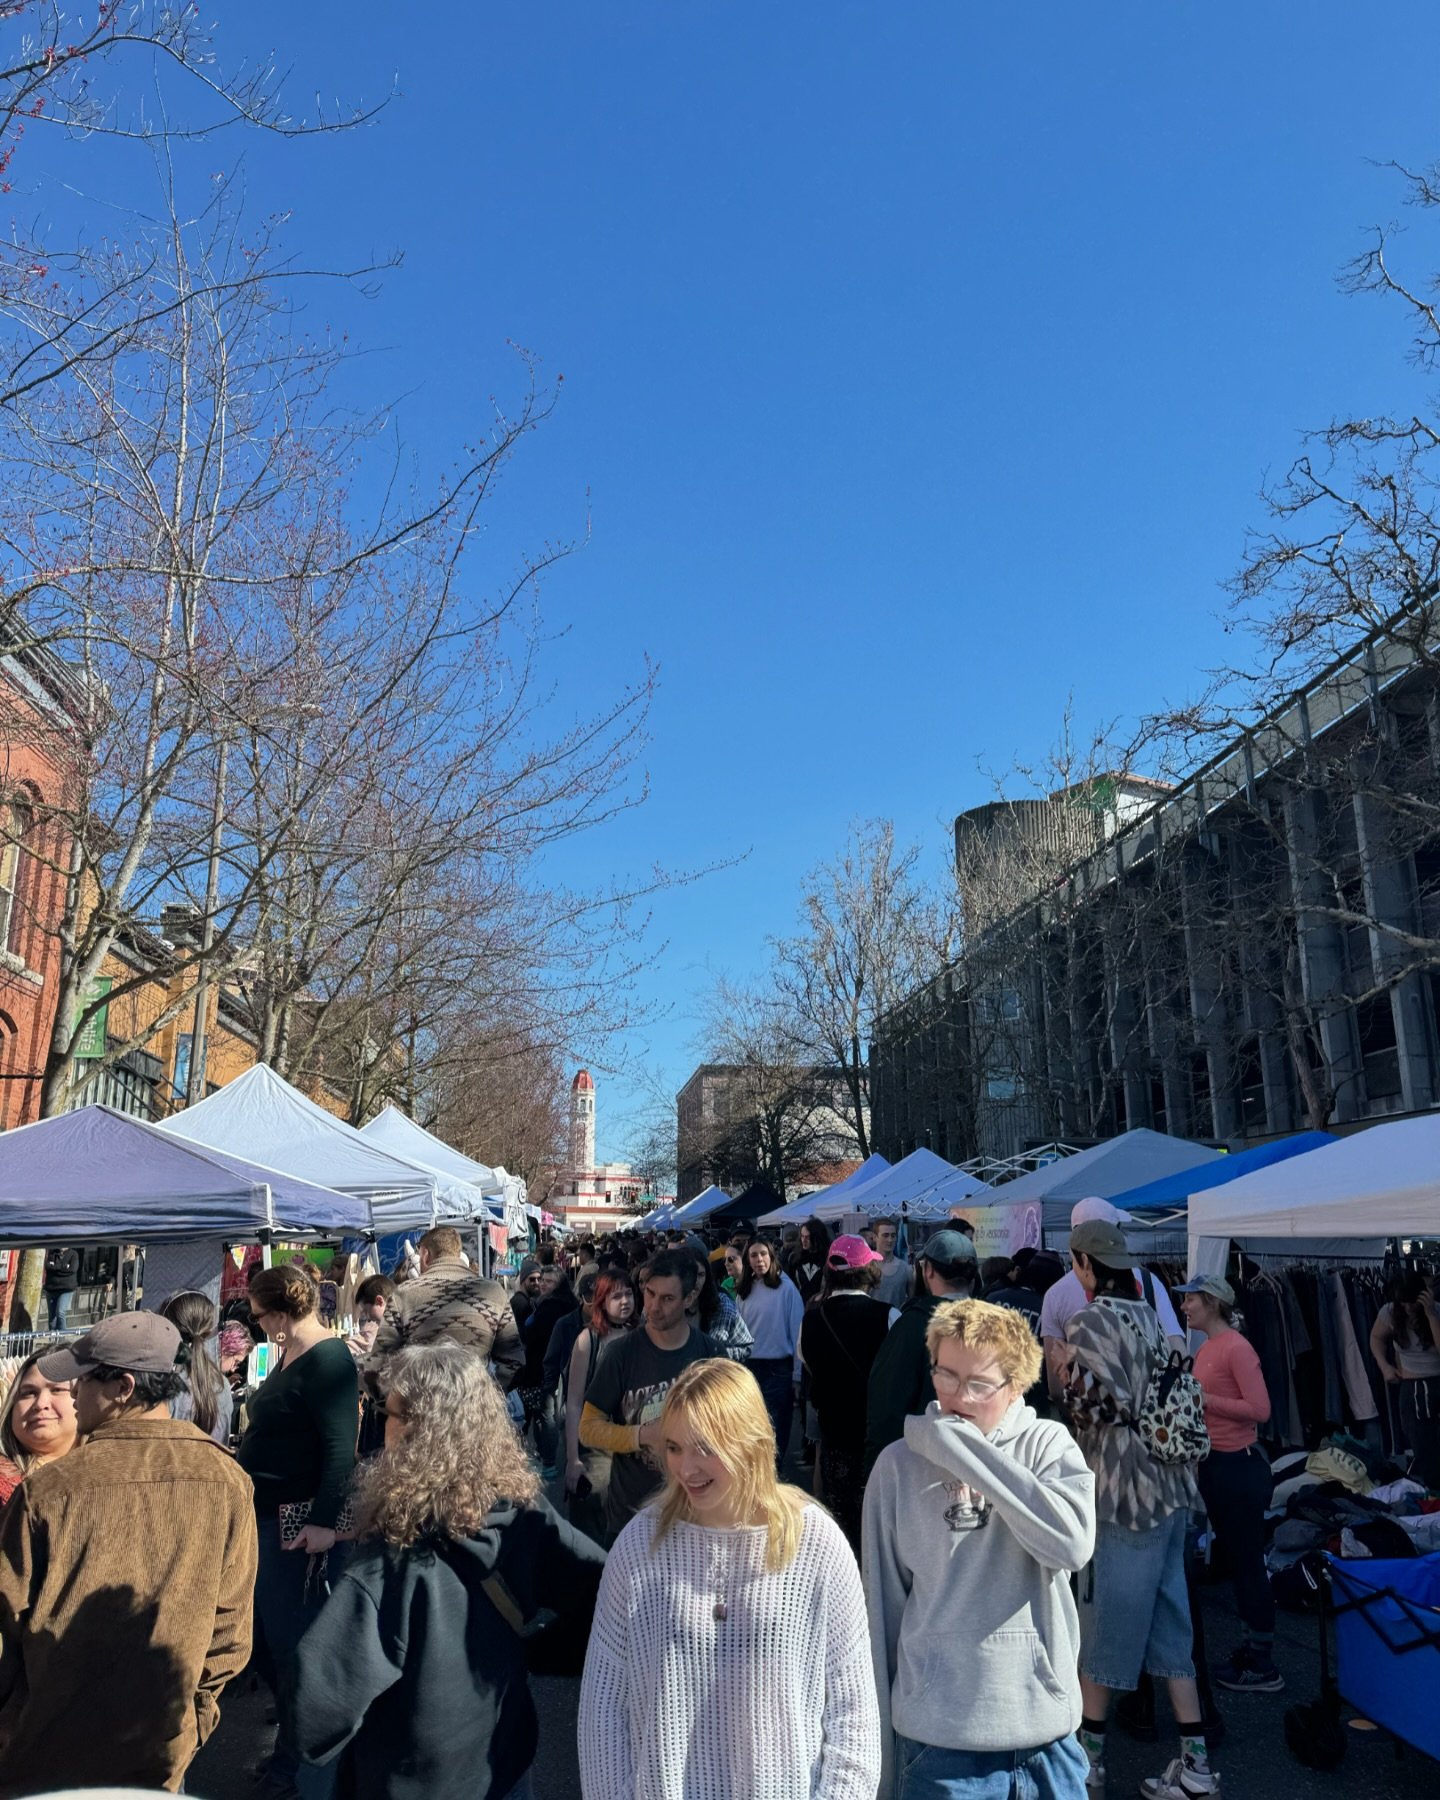 Wonderz Market is back tomorrow! 

Head to the 1300 block of Commercial Street from 11am-4pm to shop from 70+ vendors filling the street with art, plants, vintage clothing, jewelry, and so much more! Tattoos, piercings, and tooth gems will also be av